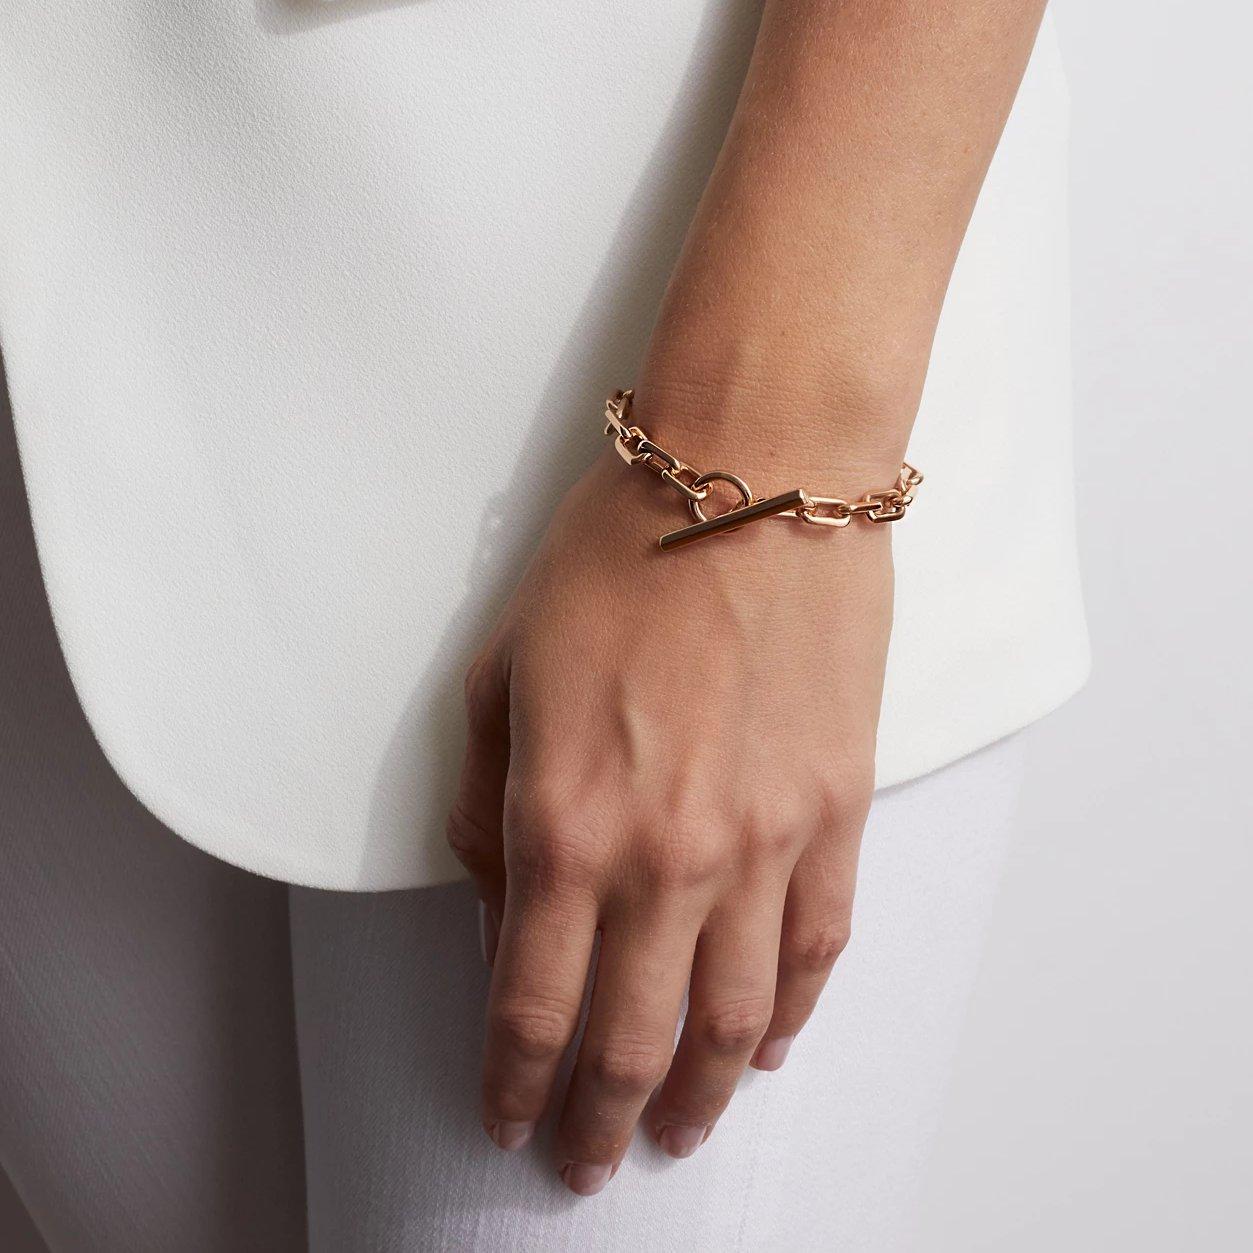 Walters Faith Saxon Collection 18K Rose Gold Toggle Chain Link Bracelet. Each link is approximately 12mm long. Bracelet is 11 links measuring 6.5